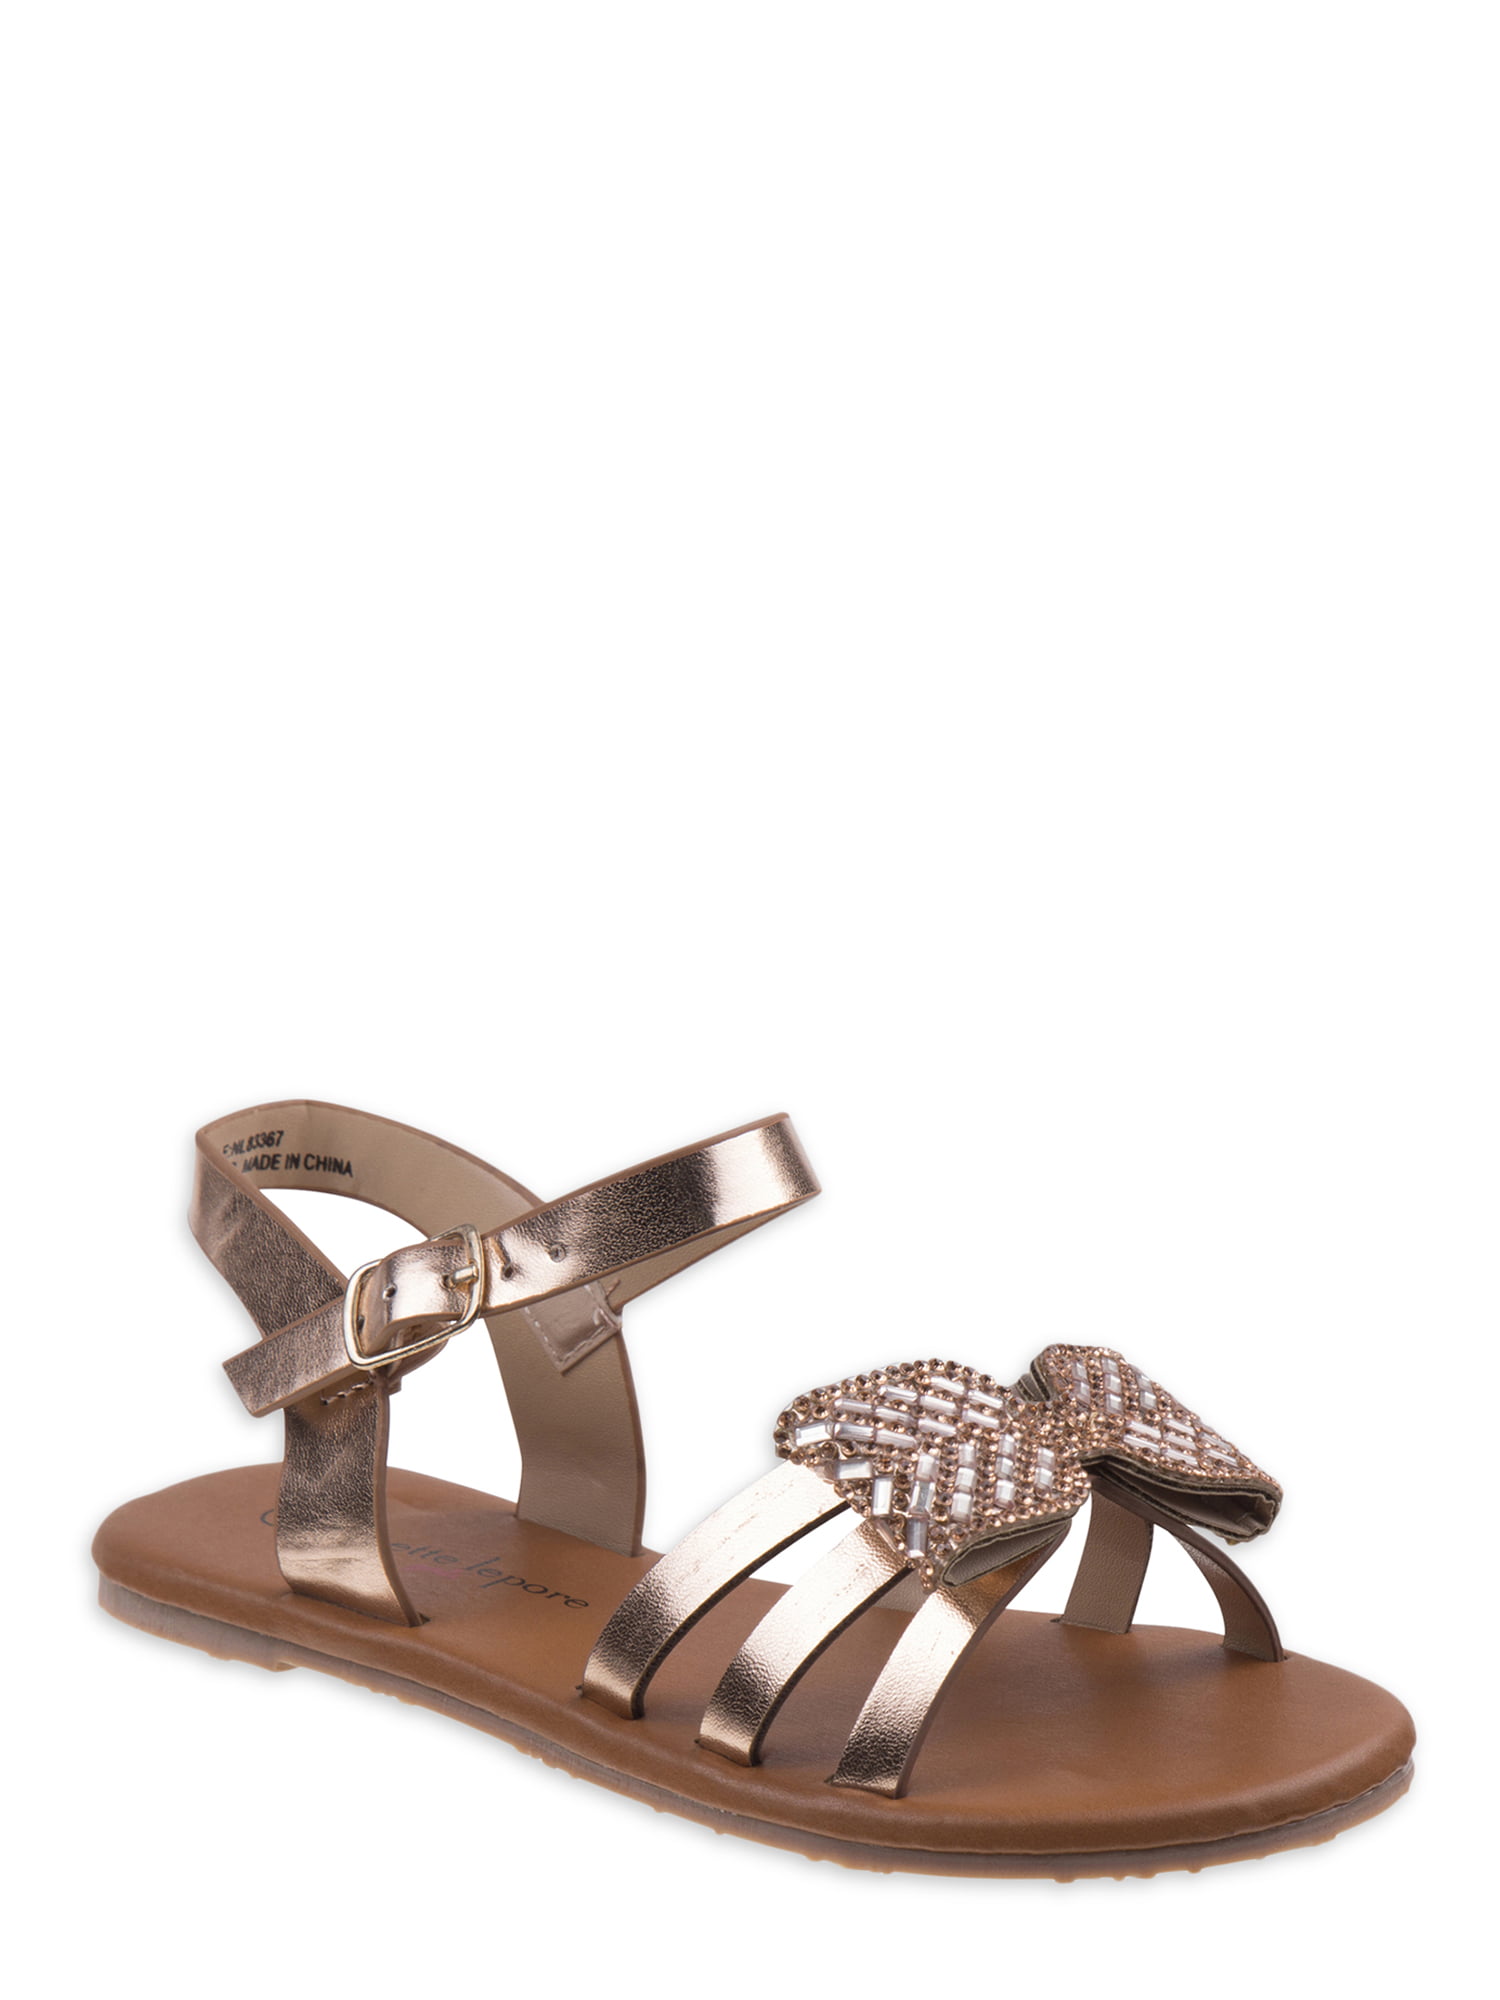 Nanette Lepore Girl Sandals w/ metallic synthetic upper with rhinestone ...